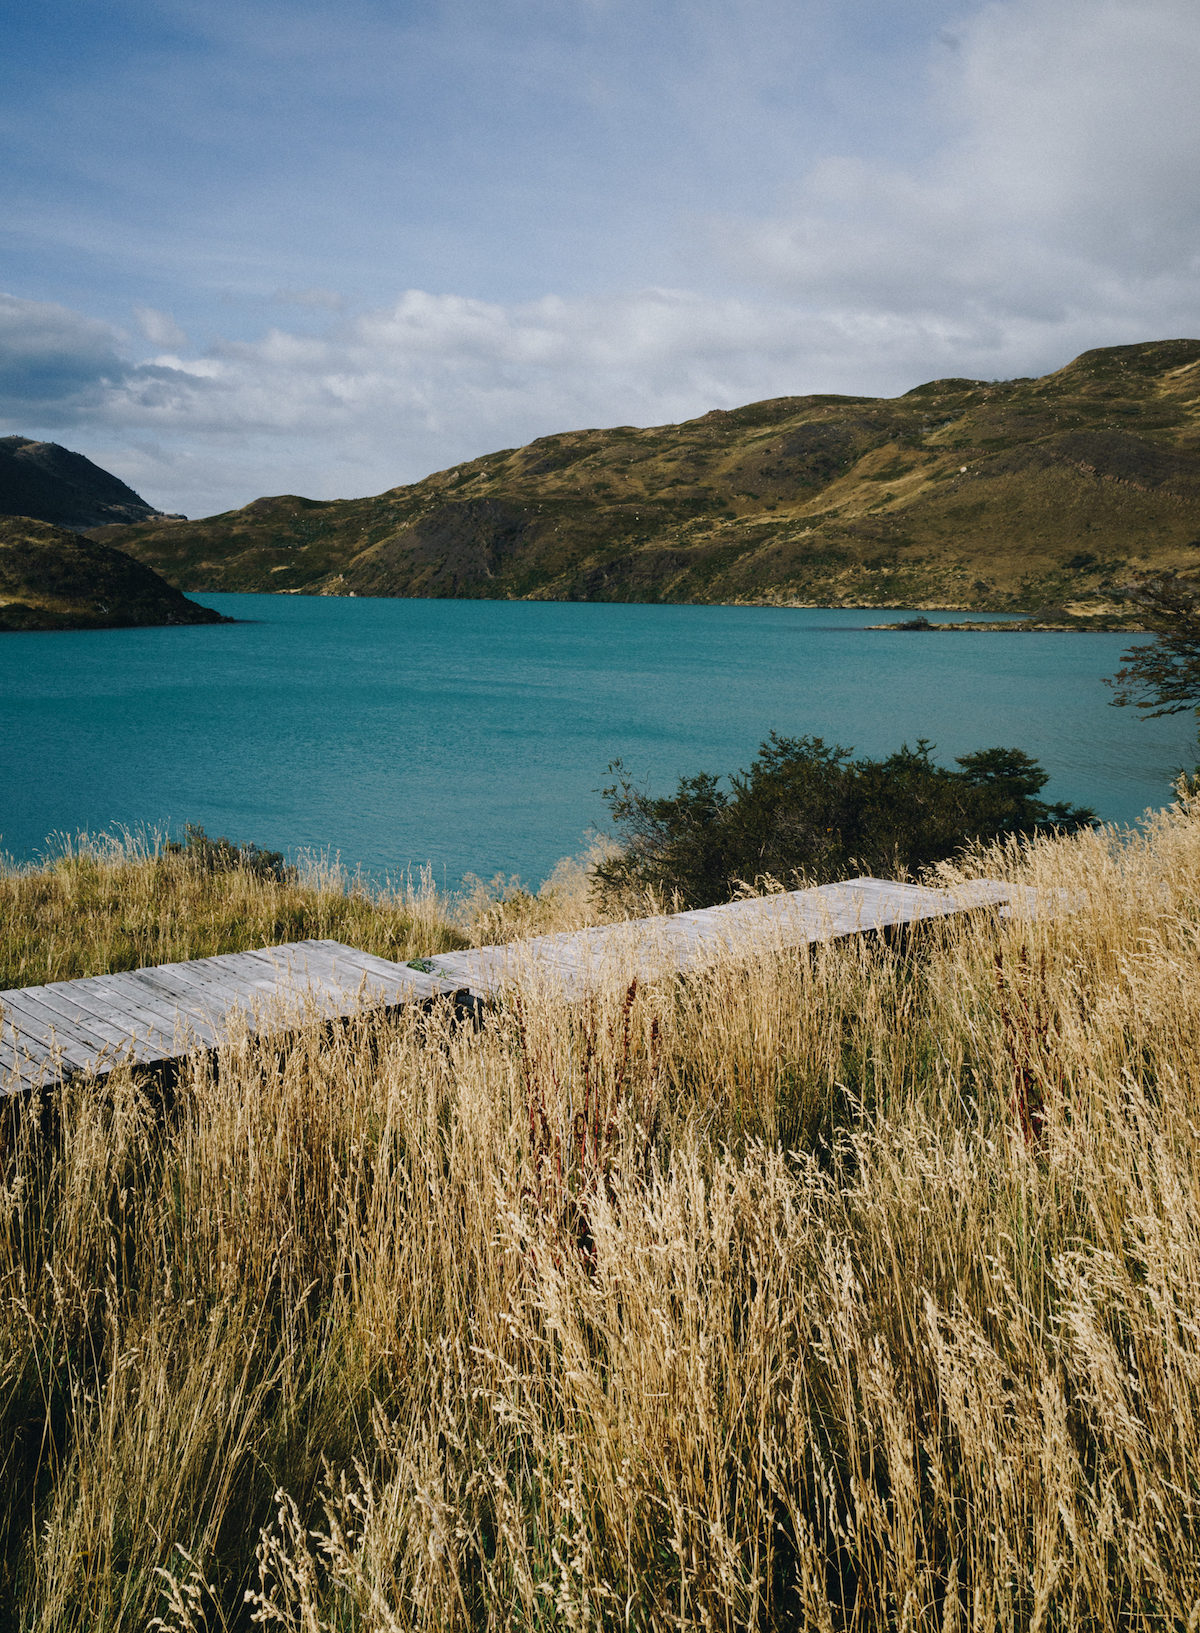 A serene landscape of golden grass and a blue lake in Patagonia, Chile - Photo by Louis A W Sheridan